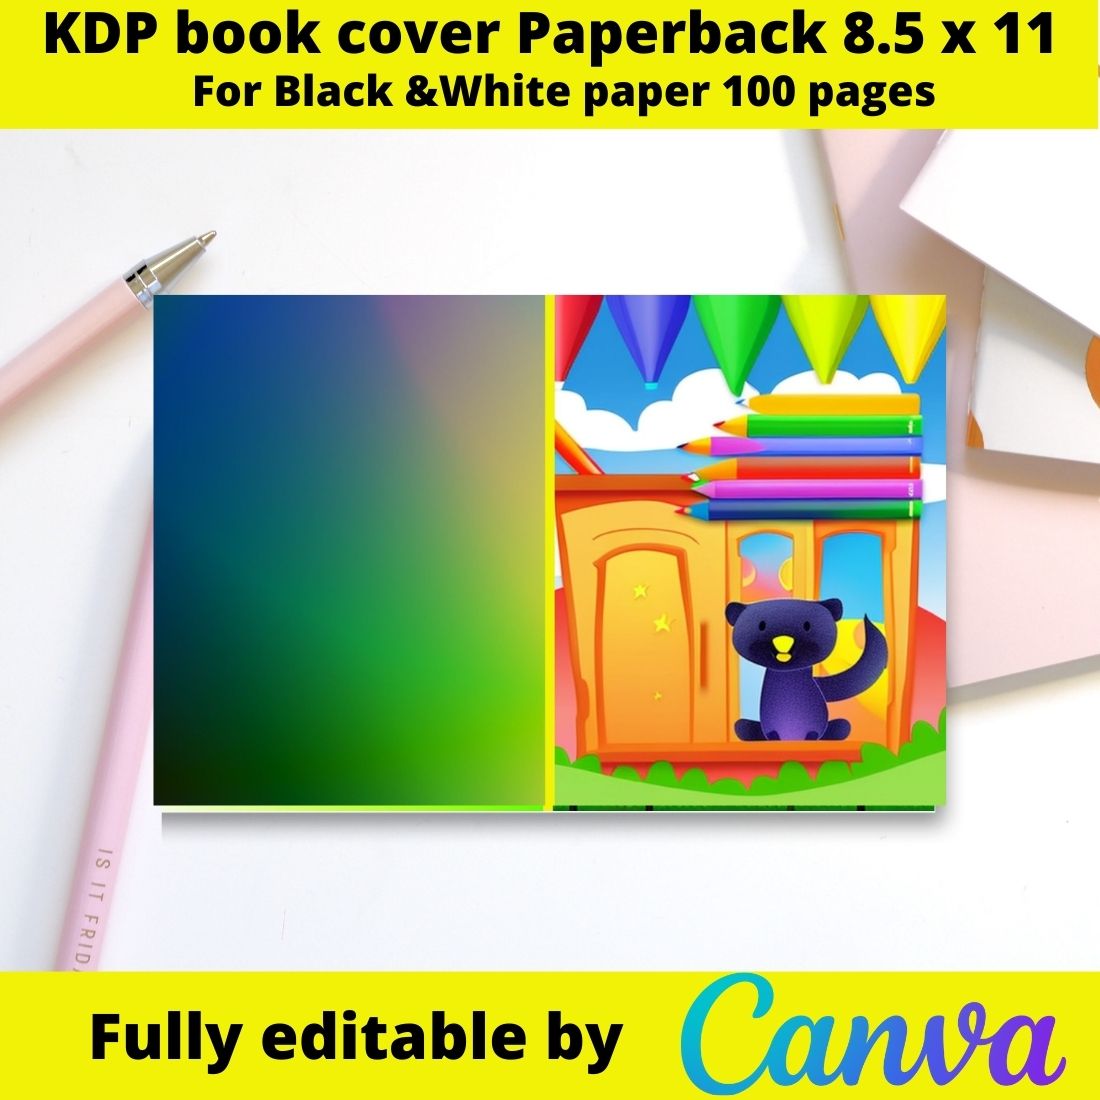 Get a KDP book cover that captures the heart of your story preview image.